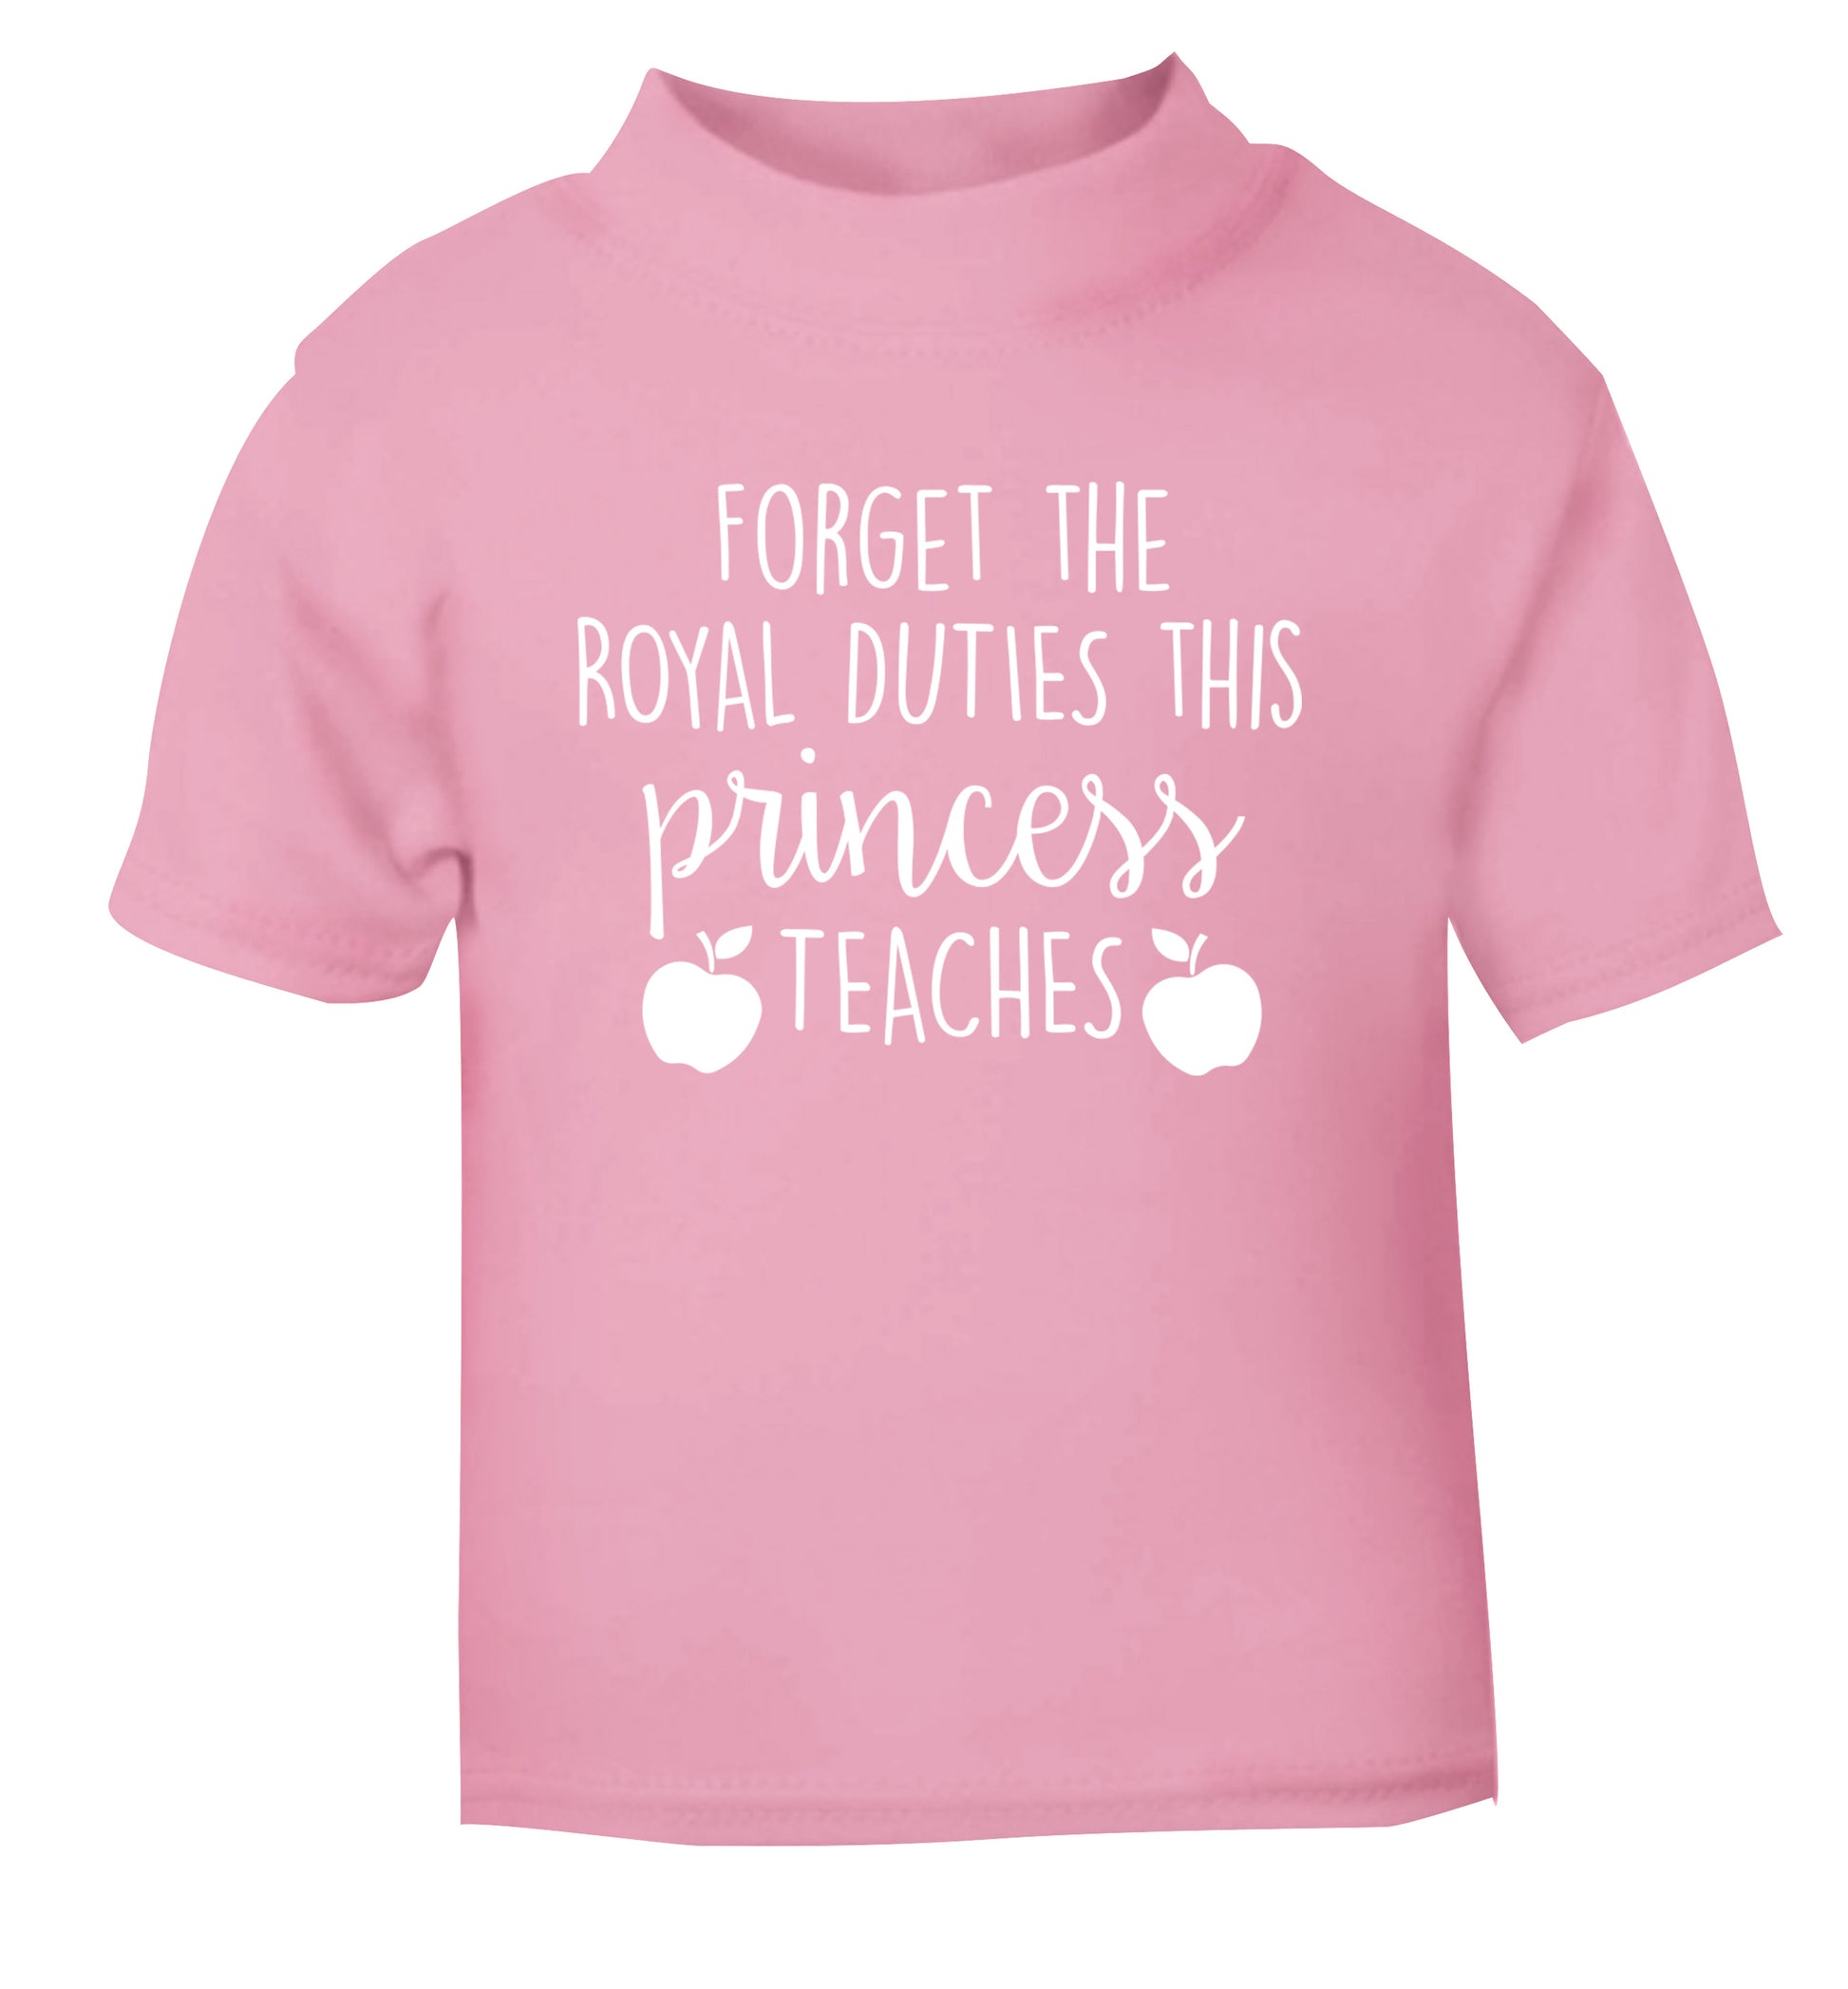 Forget the royal duties this princess teaches light pink Baby Toddler Tshirt 2 Years